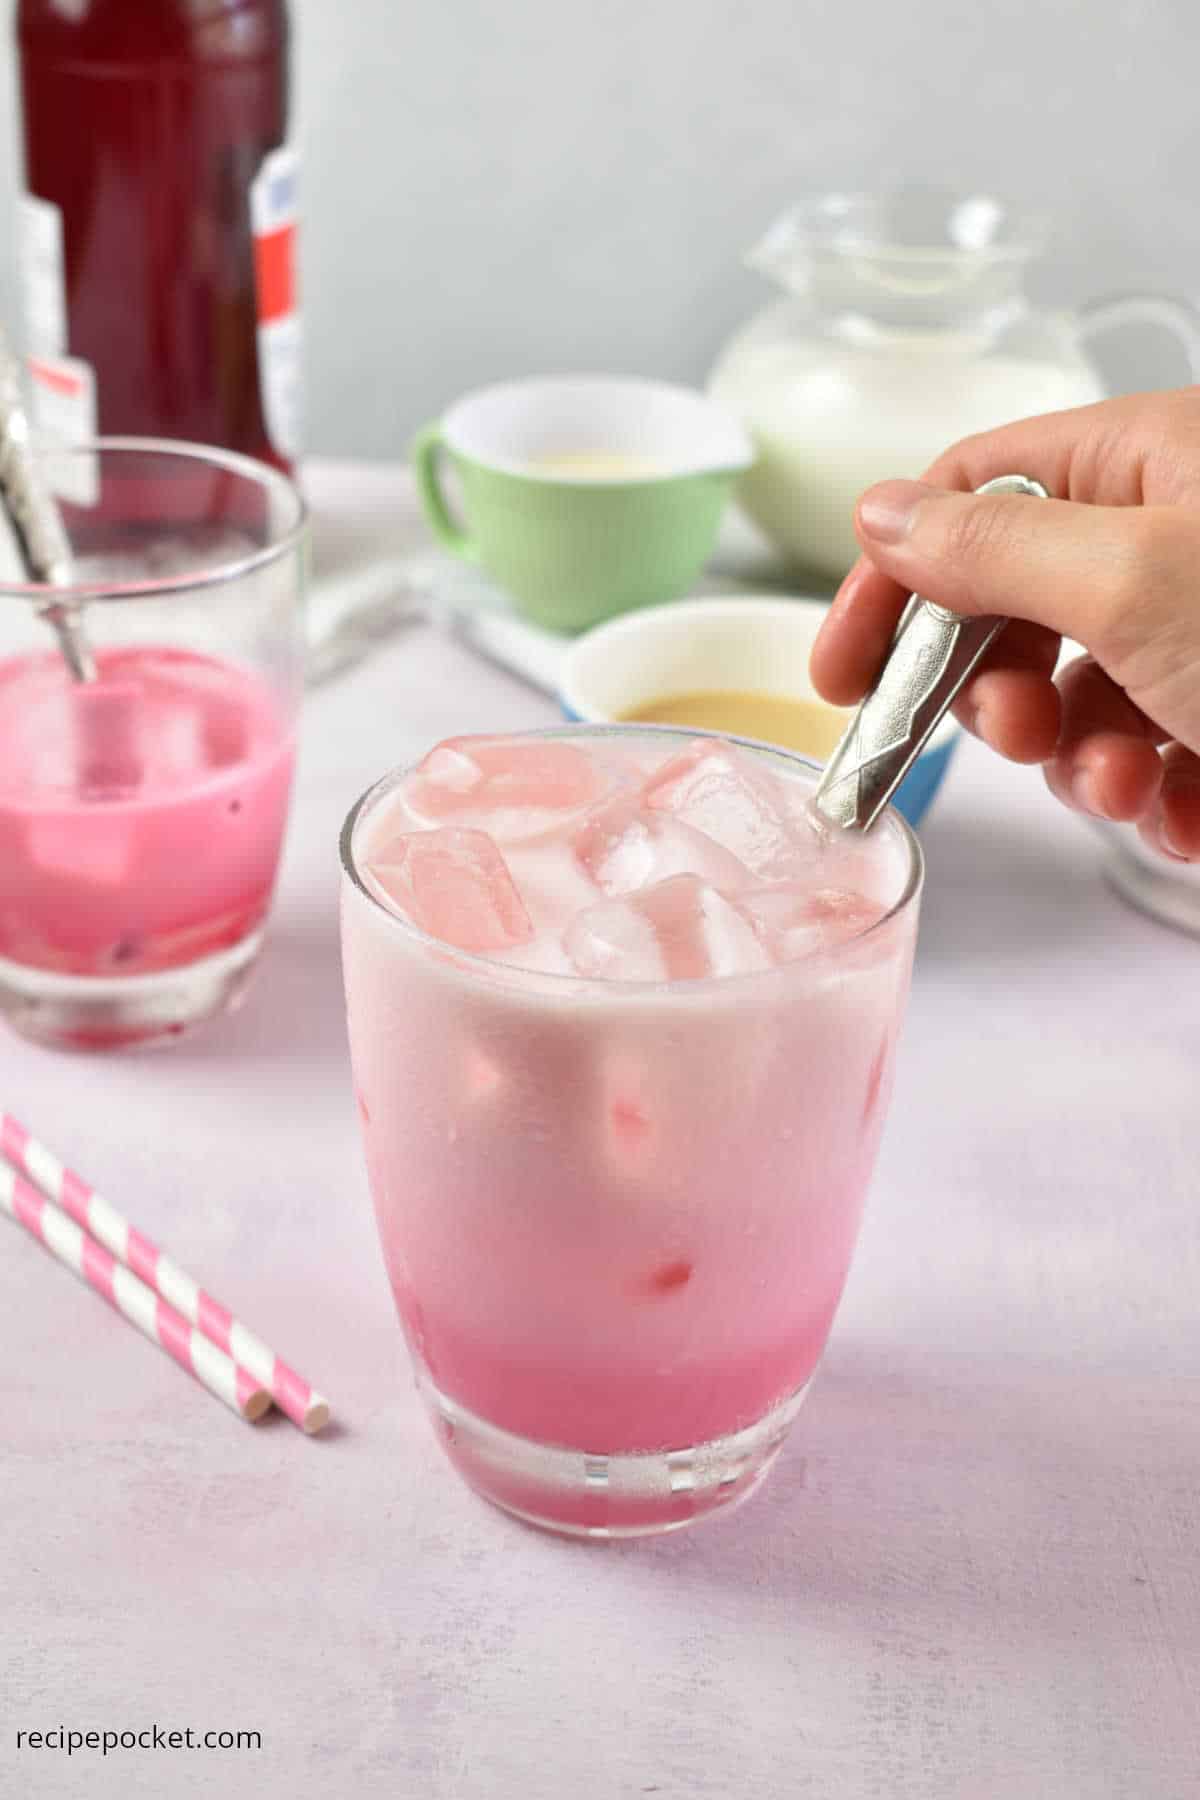 A glass of pink milk being stirred.